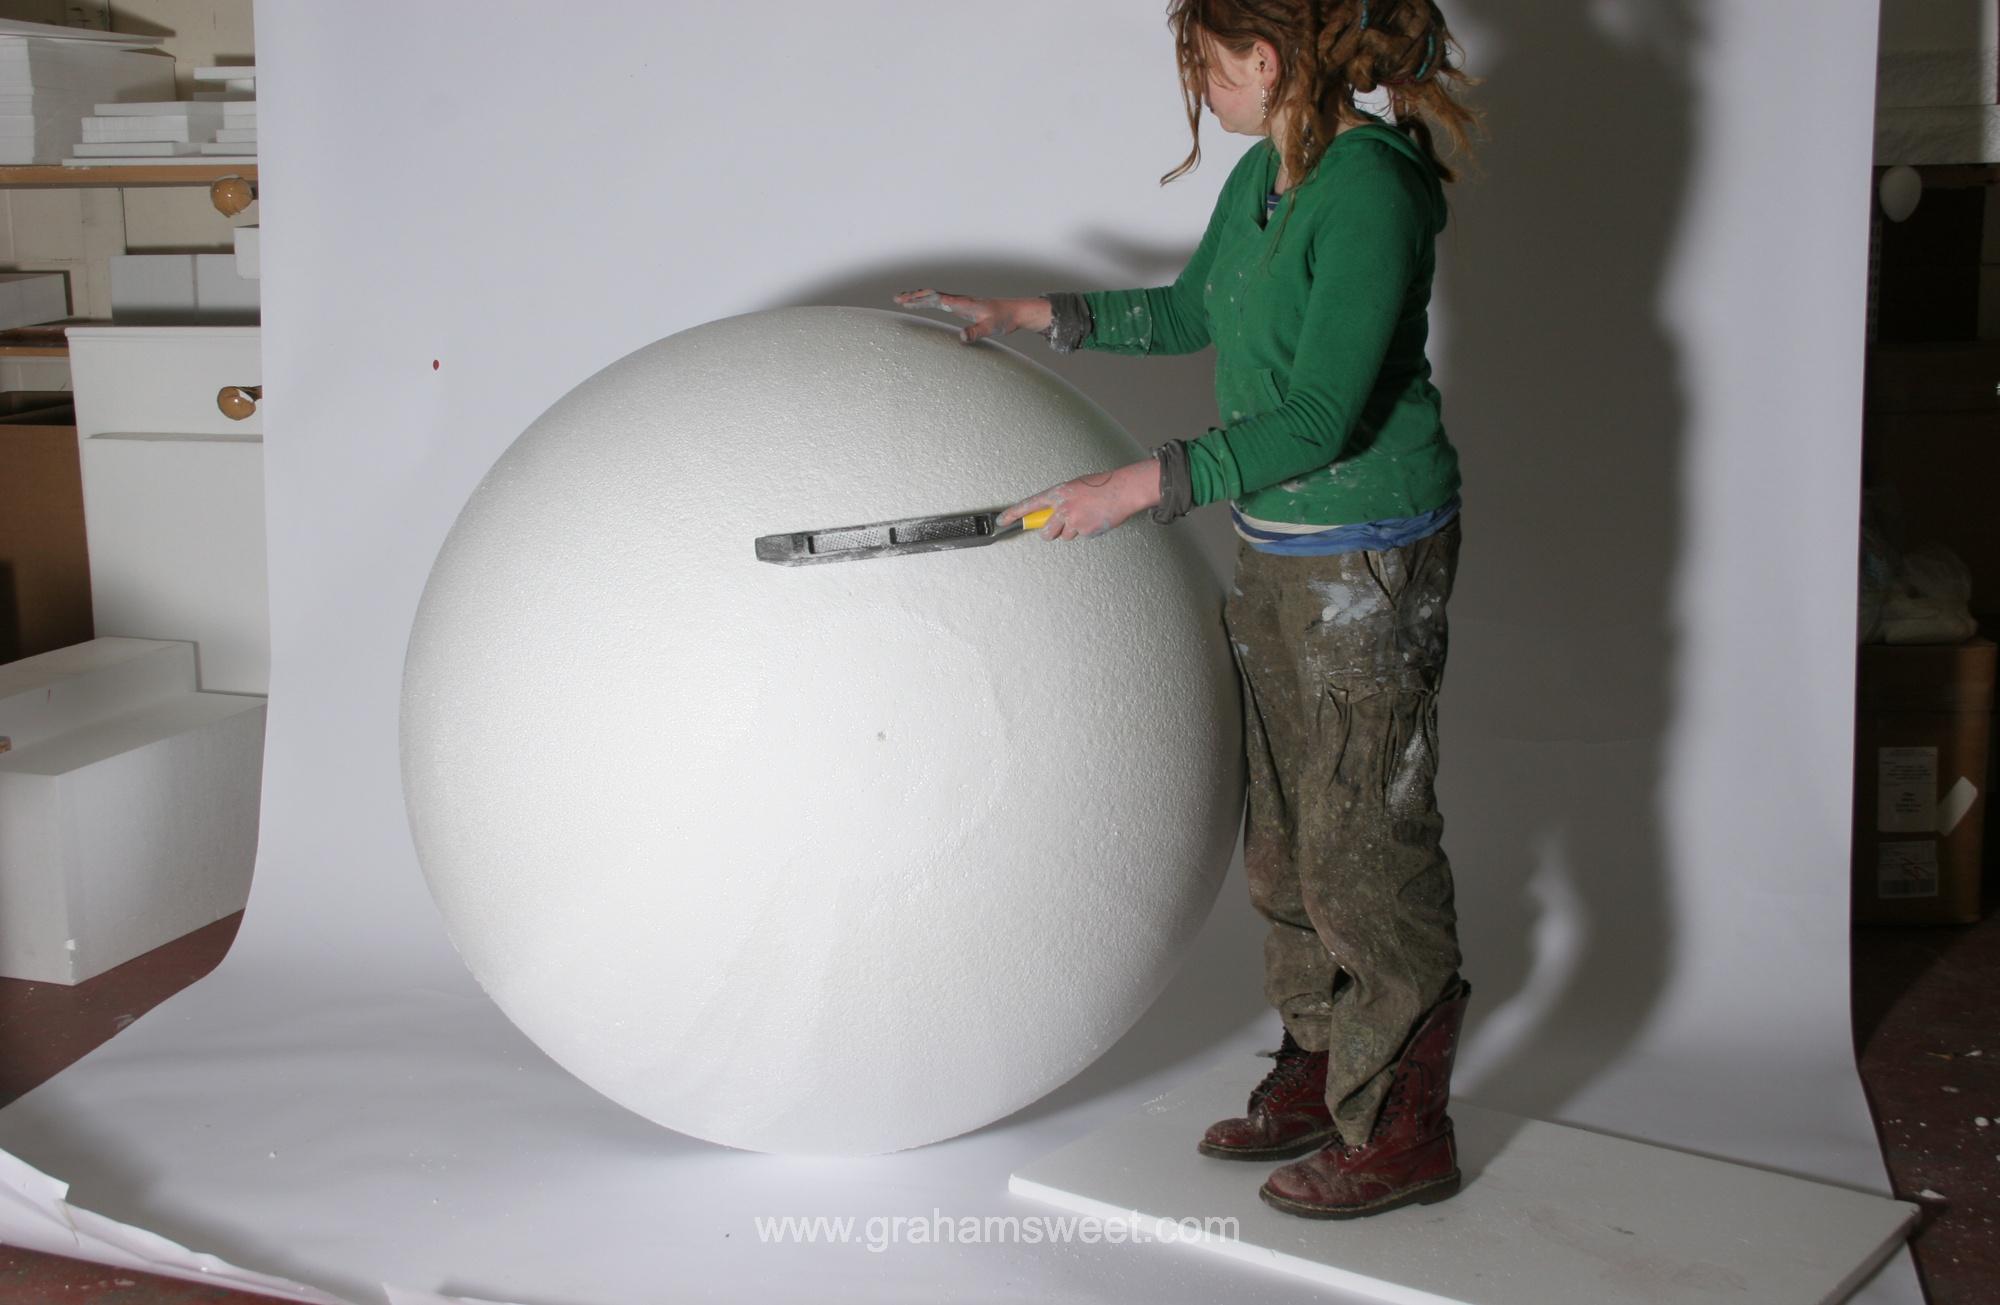 polystyrene solid 1200mm (4 foot) ball